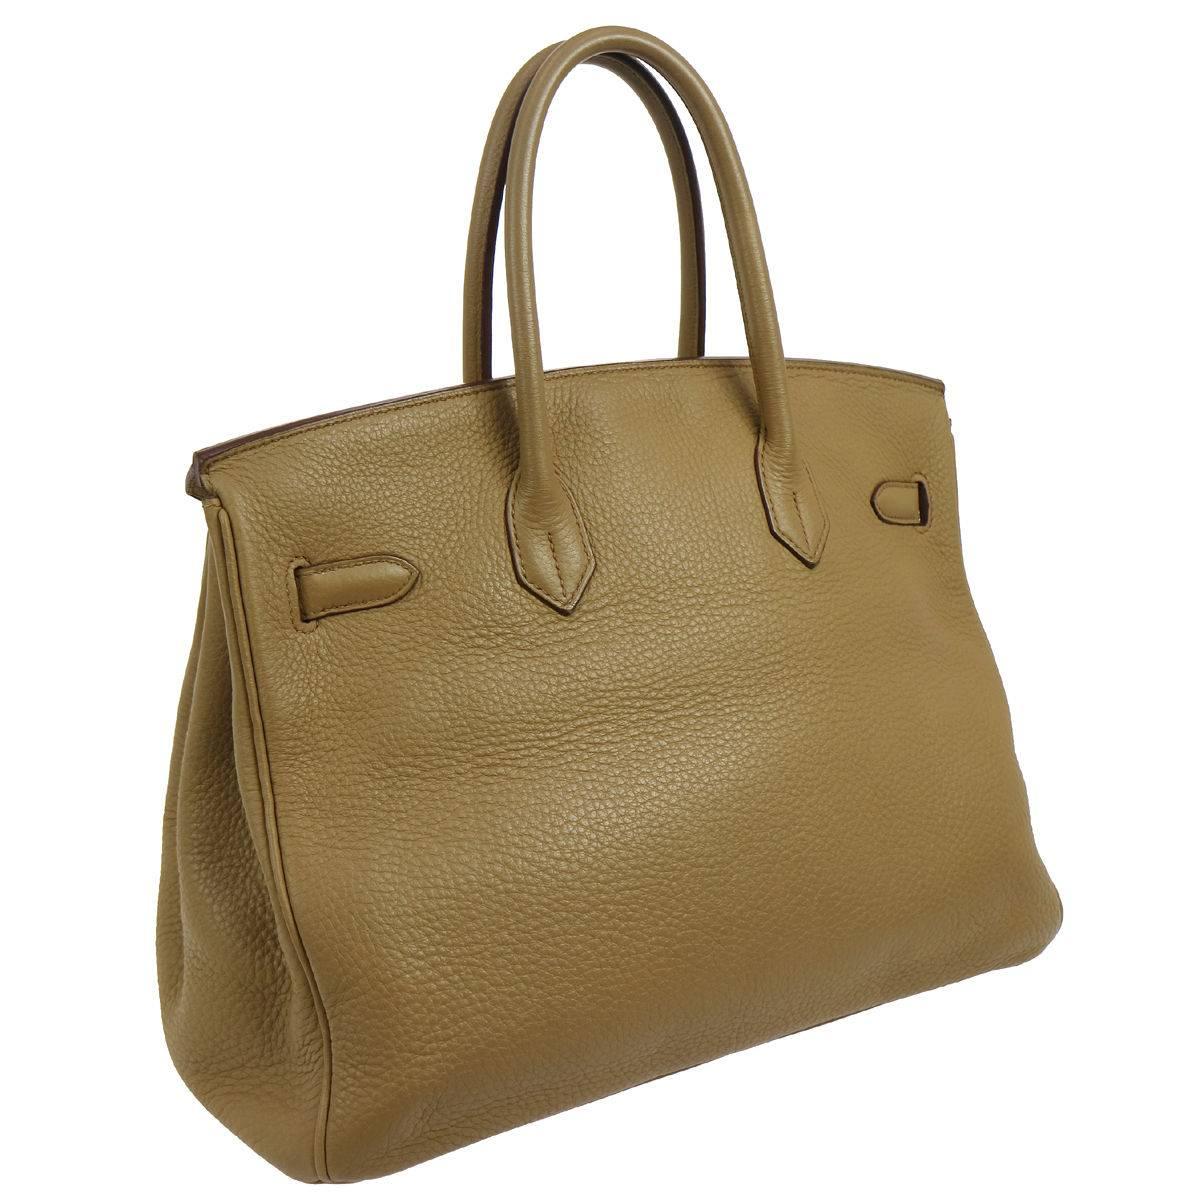 Hermes Birkin 35 Taupe Gold CarryAll Top Handle Satchel Tote Shoulder Bag 

Clemence leather
Gold tone hardware
Date code Square N
Made in France
Handle drop 4